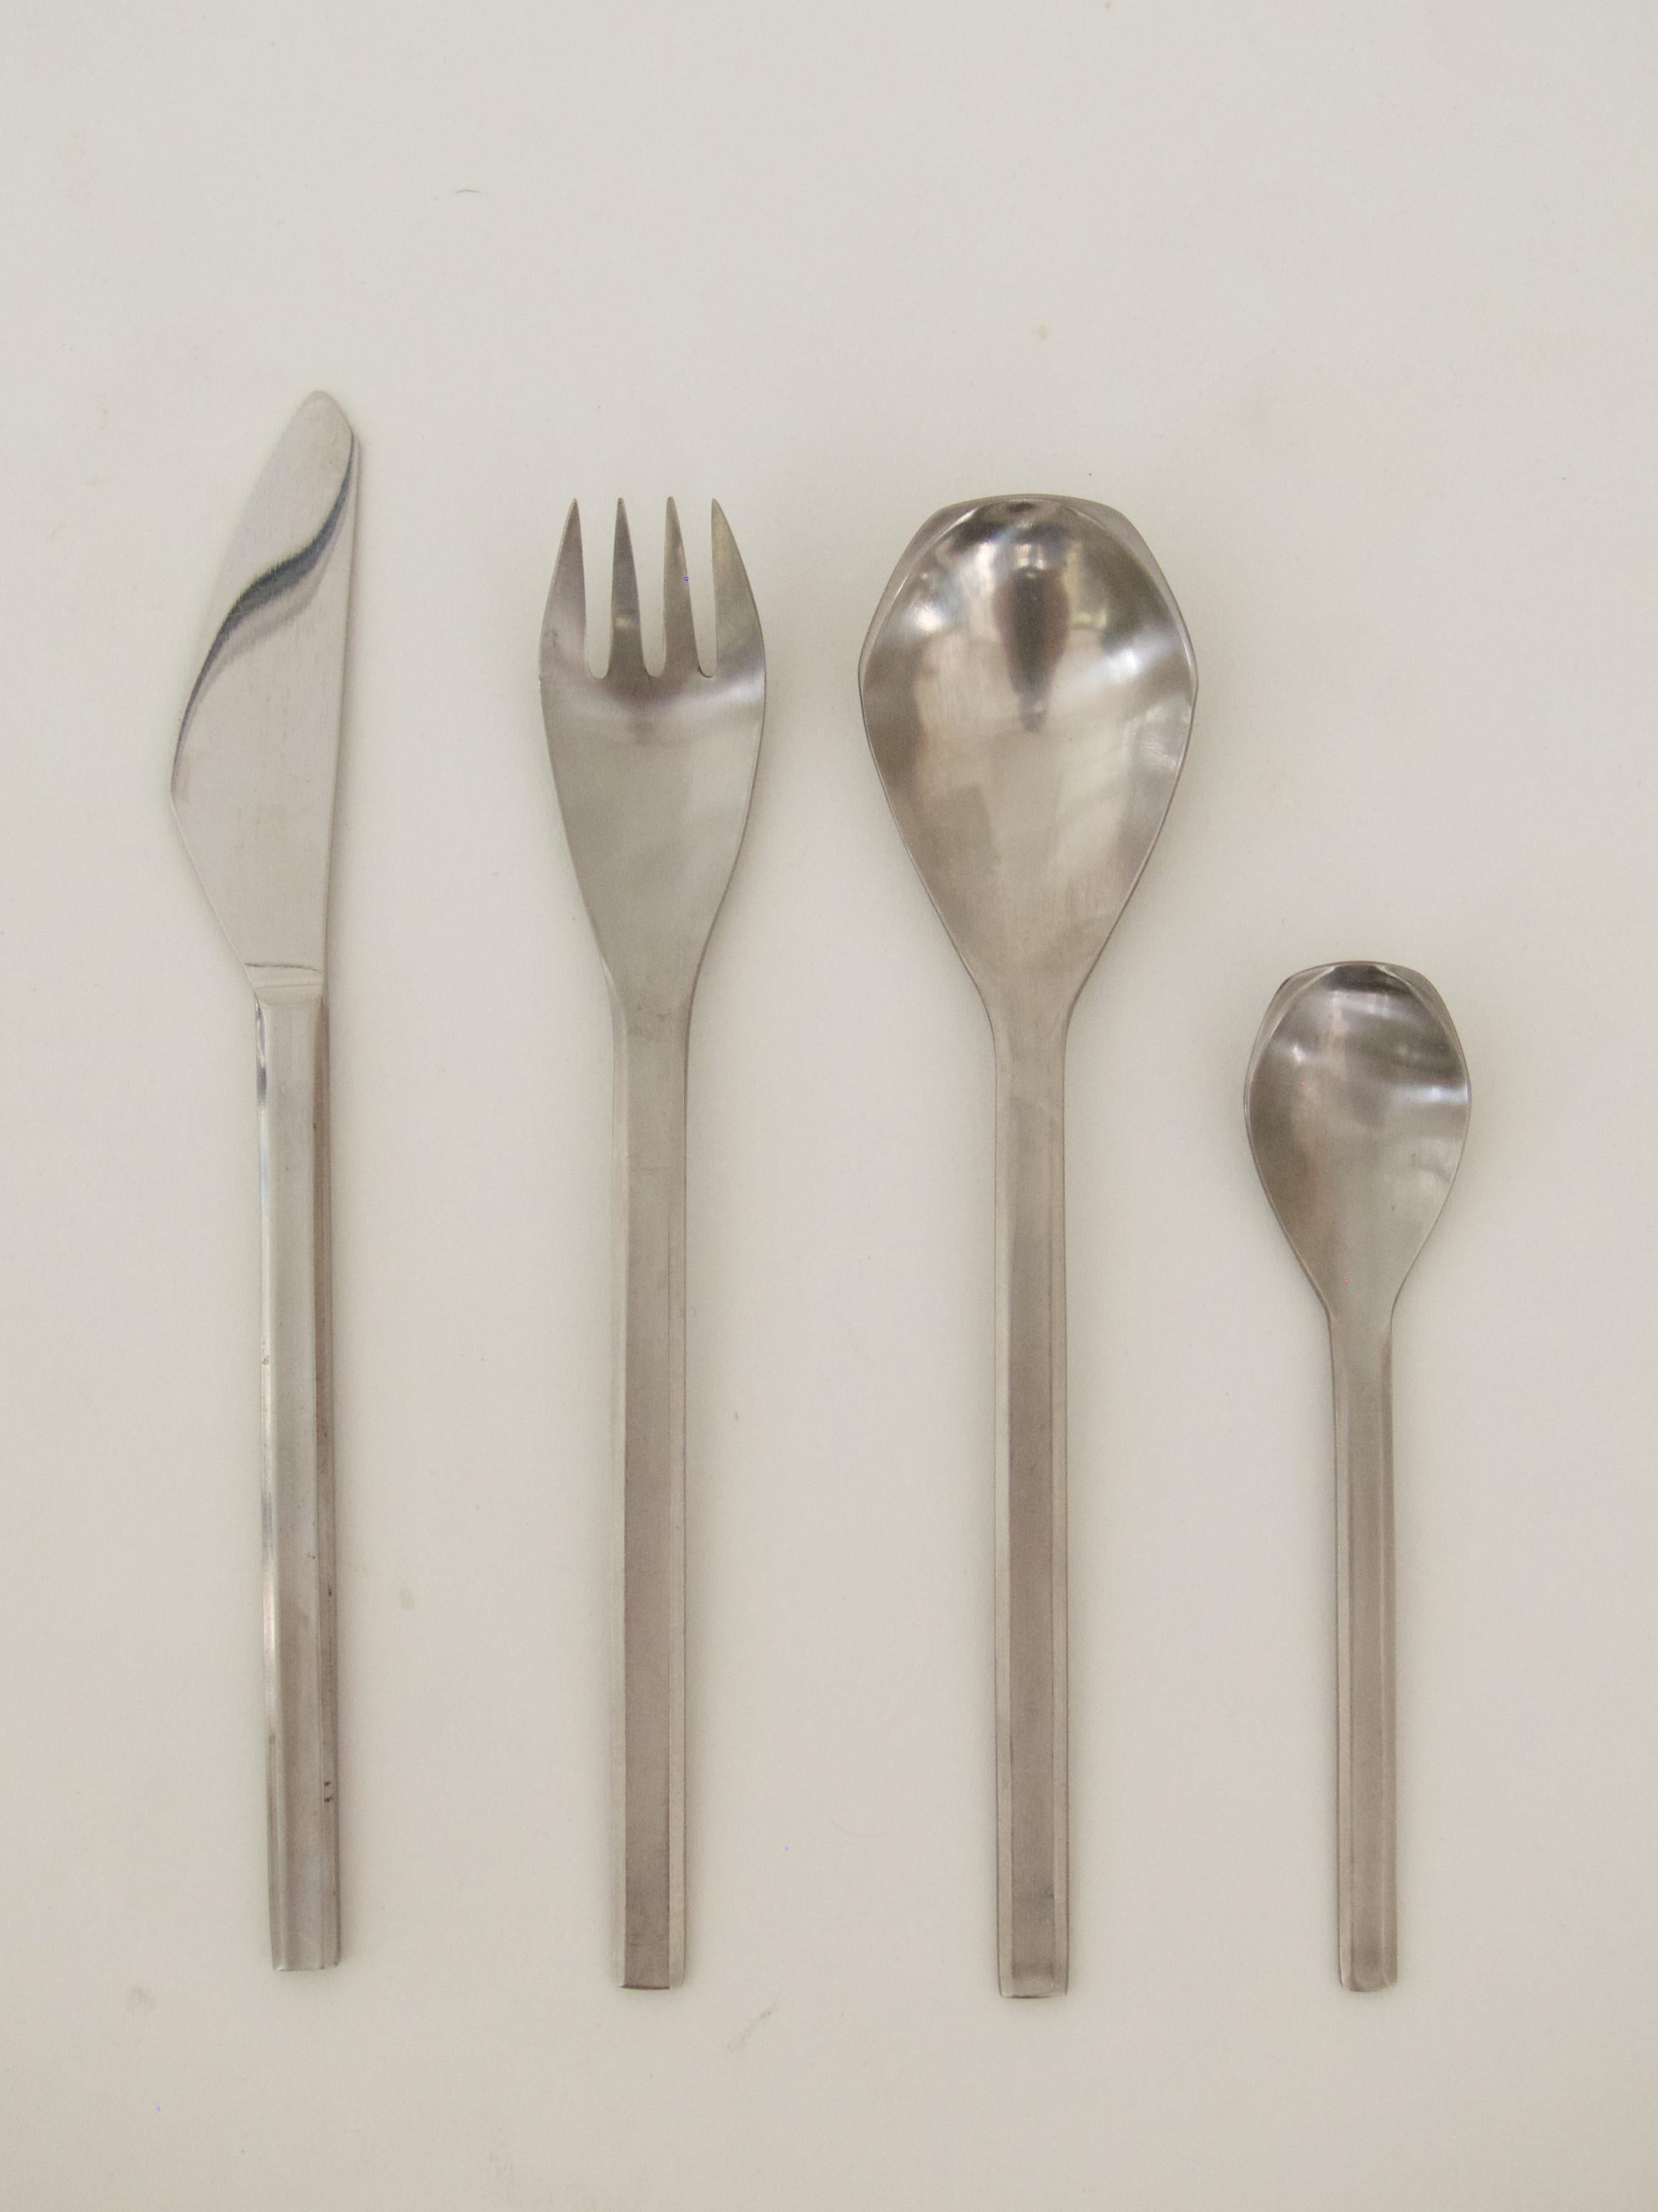 Set of cutlery, Amboss 2090, 1963 by Helmut Alder
24 pieces: Six knives, six forks, six spoons and six teaspoons

Marked: Amboss Logo, Amboss Austria Rostfrei, Stainless

Knives: 21 cm / 8.27 in
Forkes: 19.5 cm / 7.68 in
spoones: 19.5 cm /